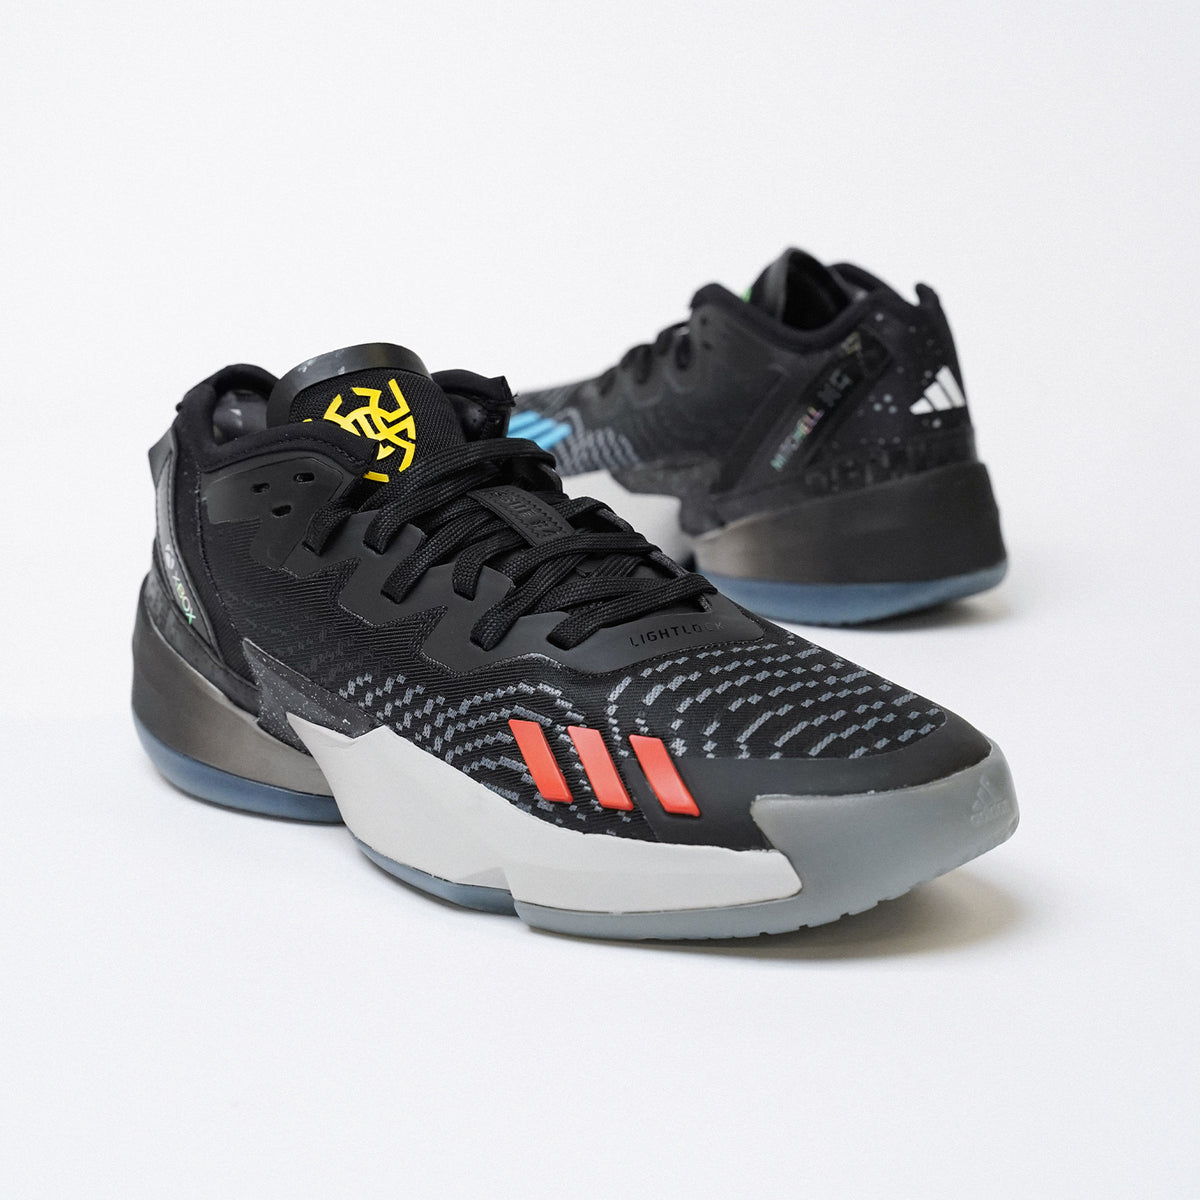 Adidas Unisex D.O.N. Issue 4 Basketball Shoes, Black/White/Carbon / 11.5